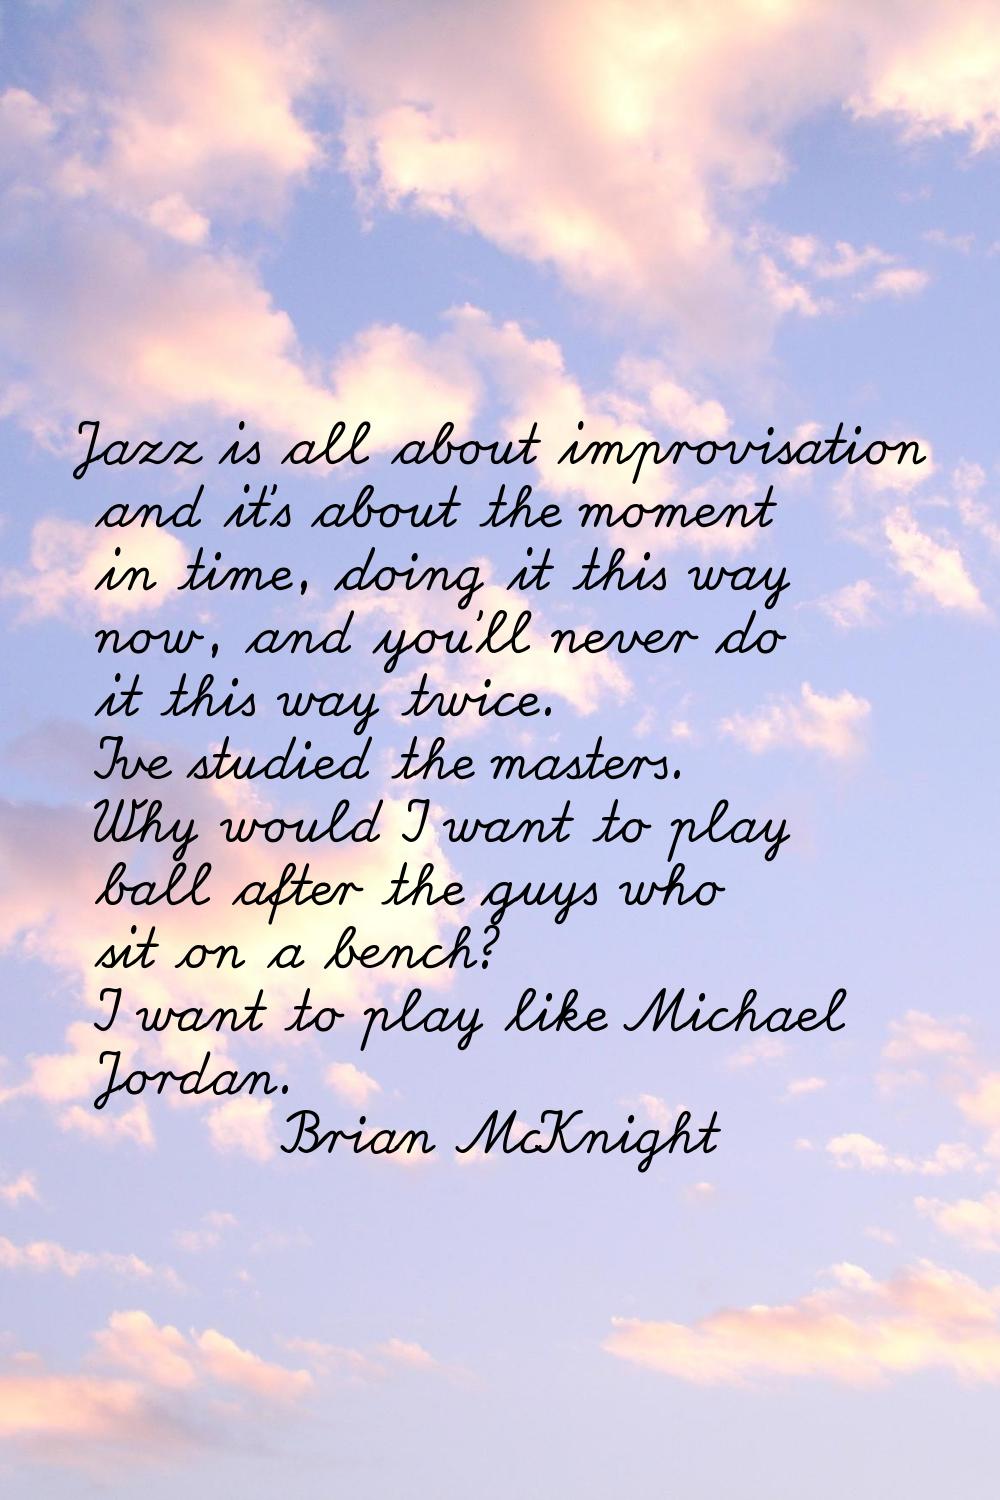 Jazz is all about improvisation and it's about the moment in time, doing it this way now, and you'l